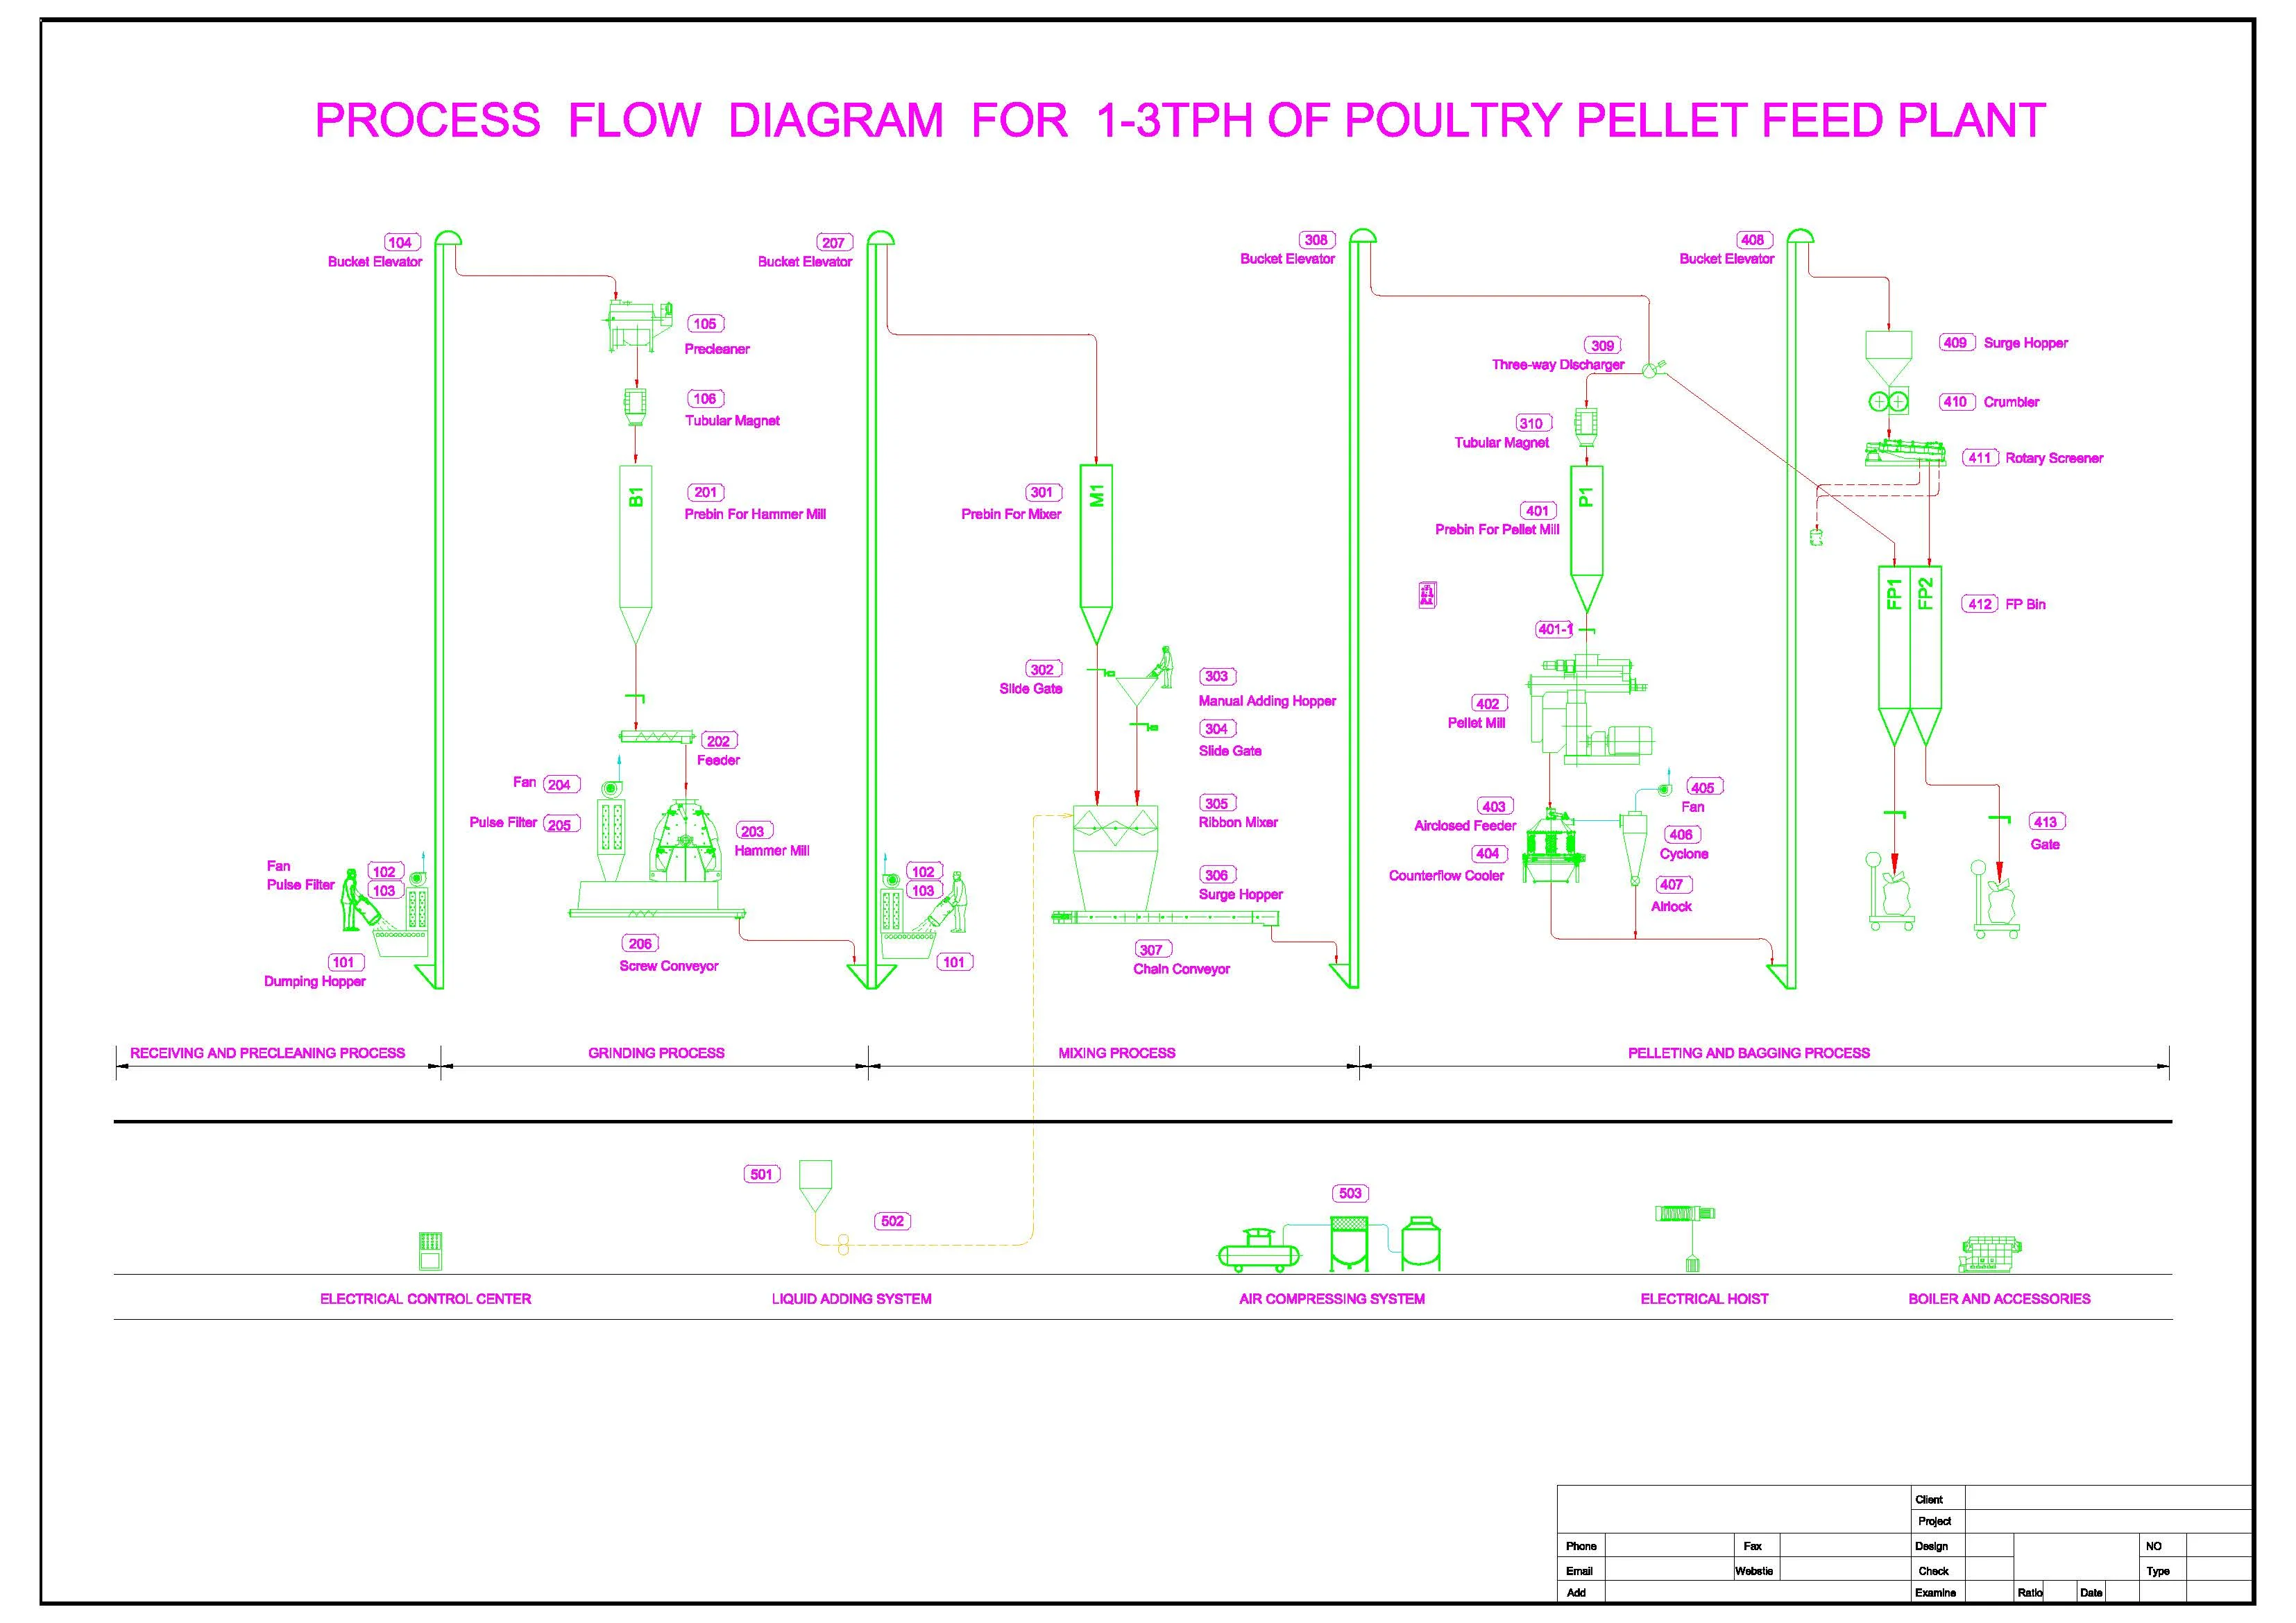 FLOW CHART FOR feed mill.jpg